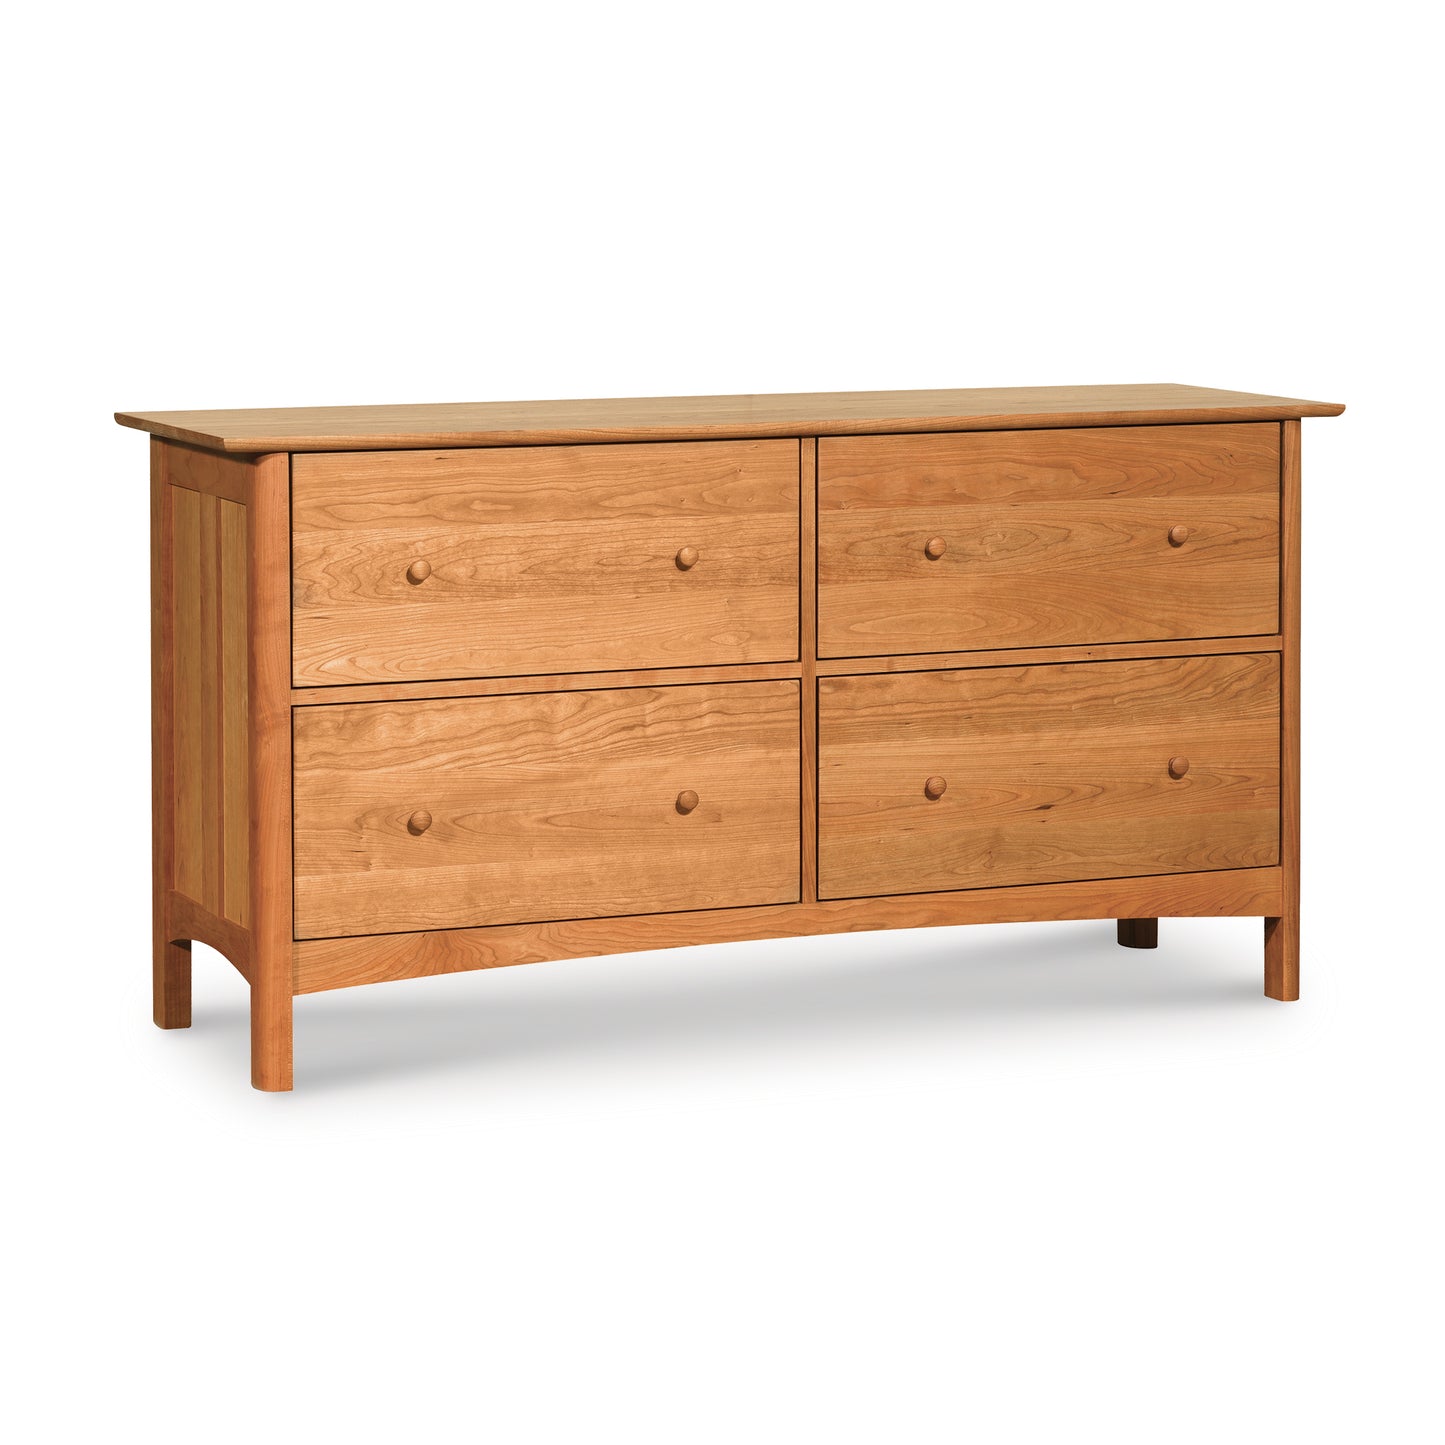 A wooden six-drawer dresser with a simple, Heartwood Shaker Style design on a white background.